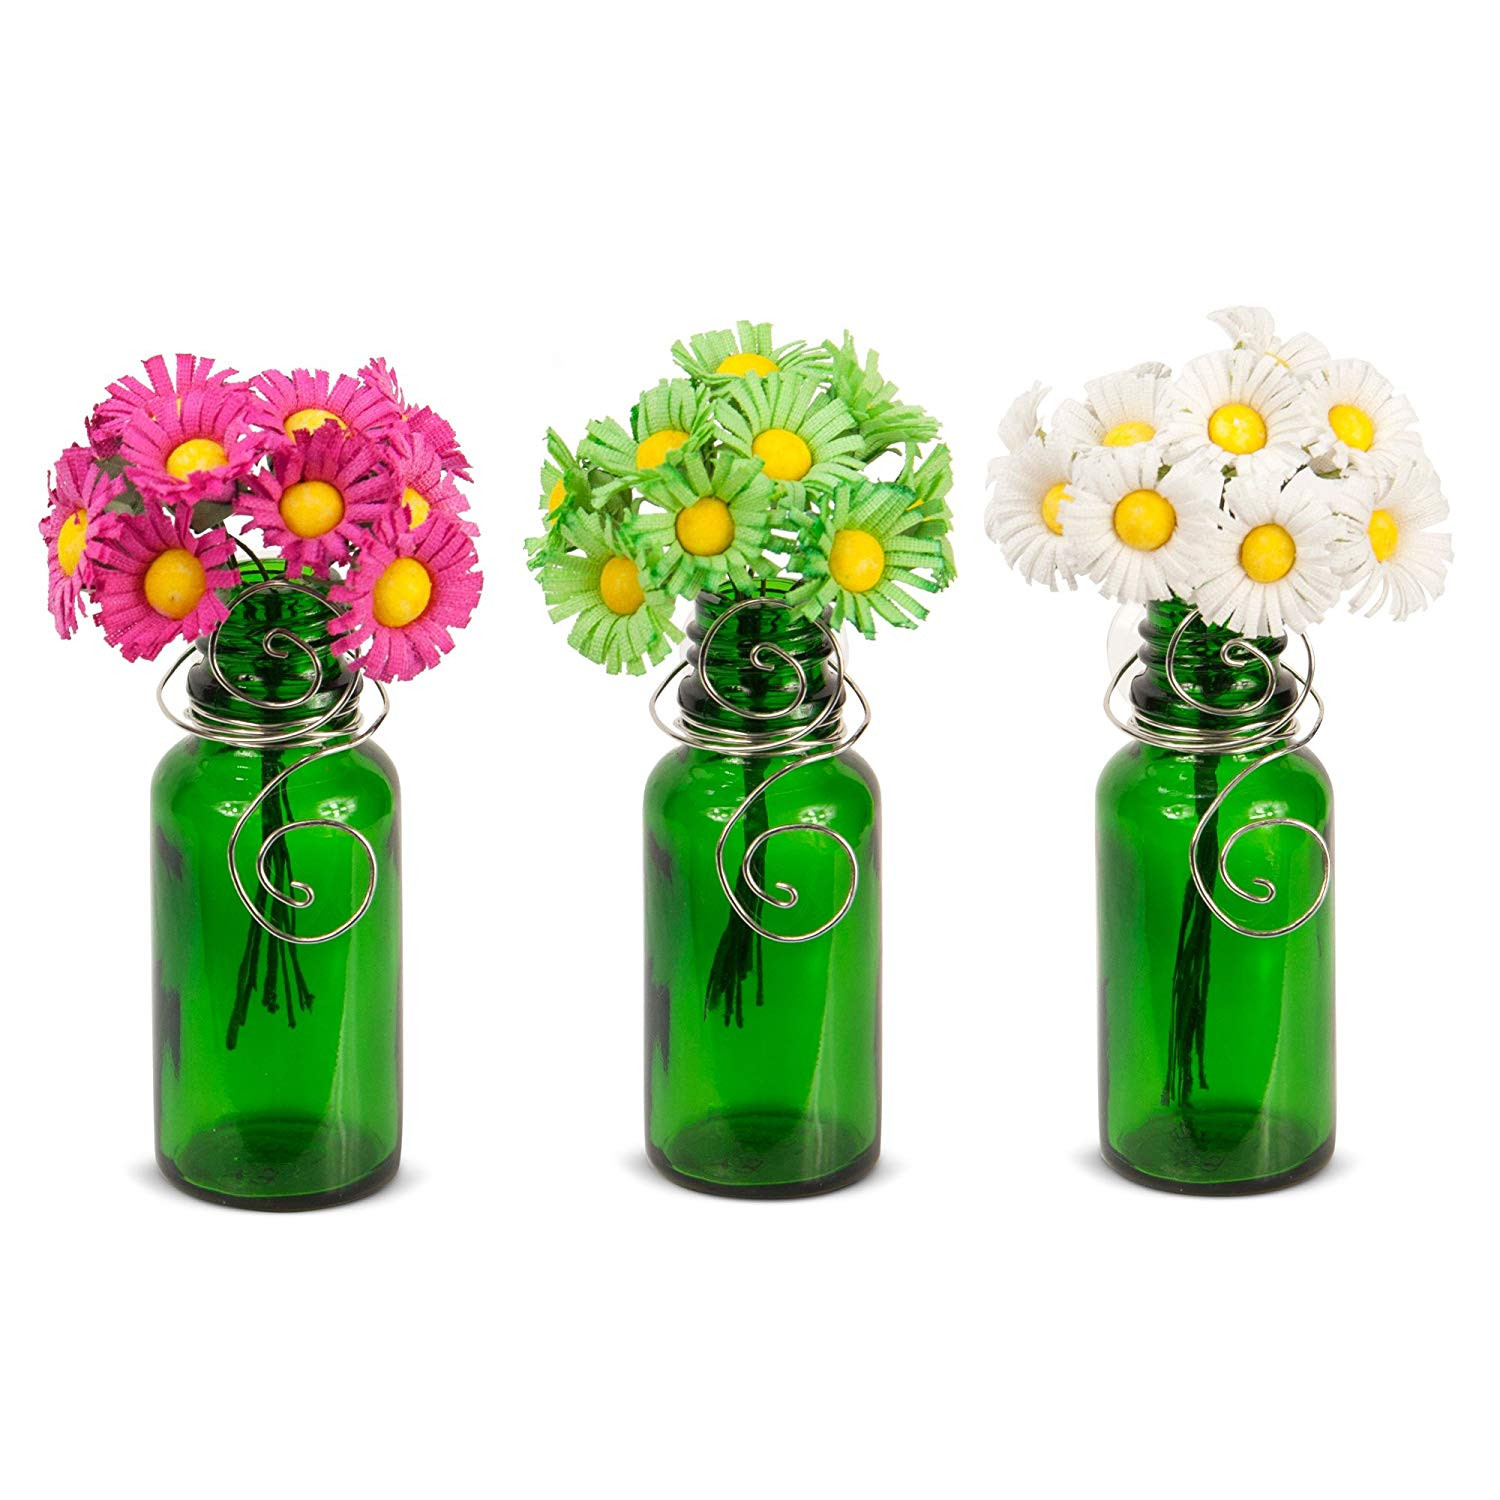 28 Spectacular Cheap Small Glass Bud Vases 2024 free download cheap small glass bud vases of amazon com vazzini mini vase bouquet suction cup bud bottle within amazon com vazzini mini vase bouquet suction cup bud bottle holder with flowers decorative f